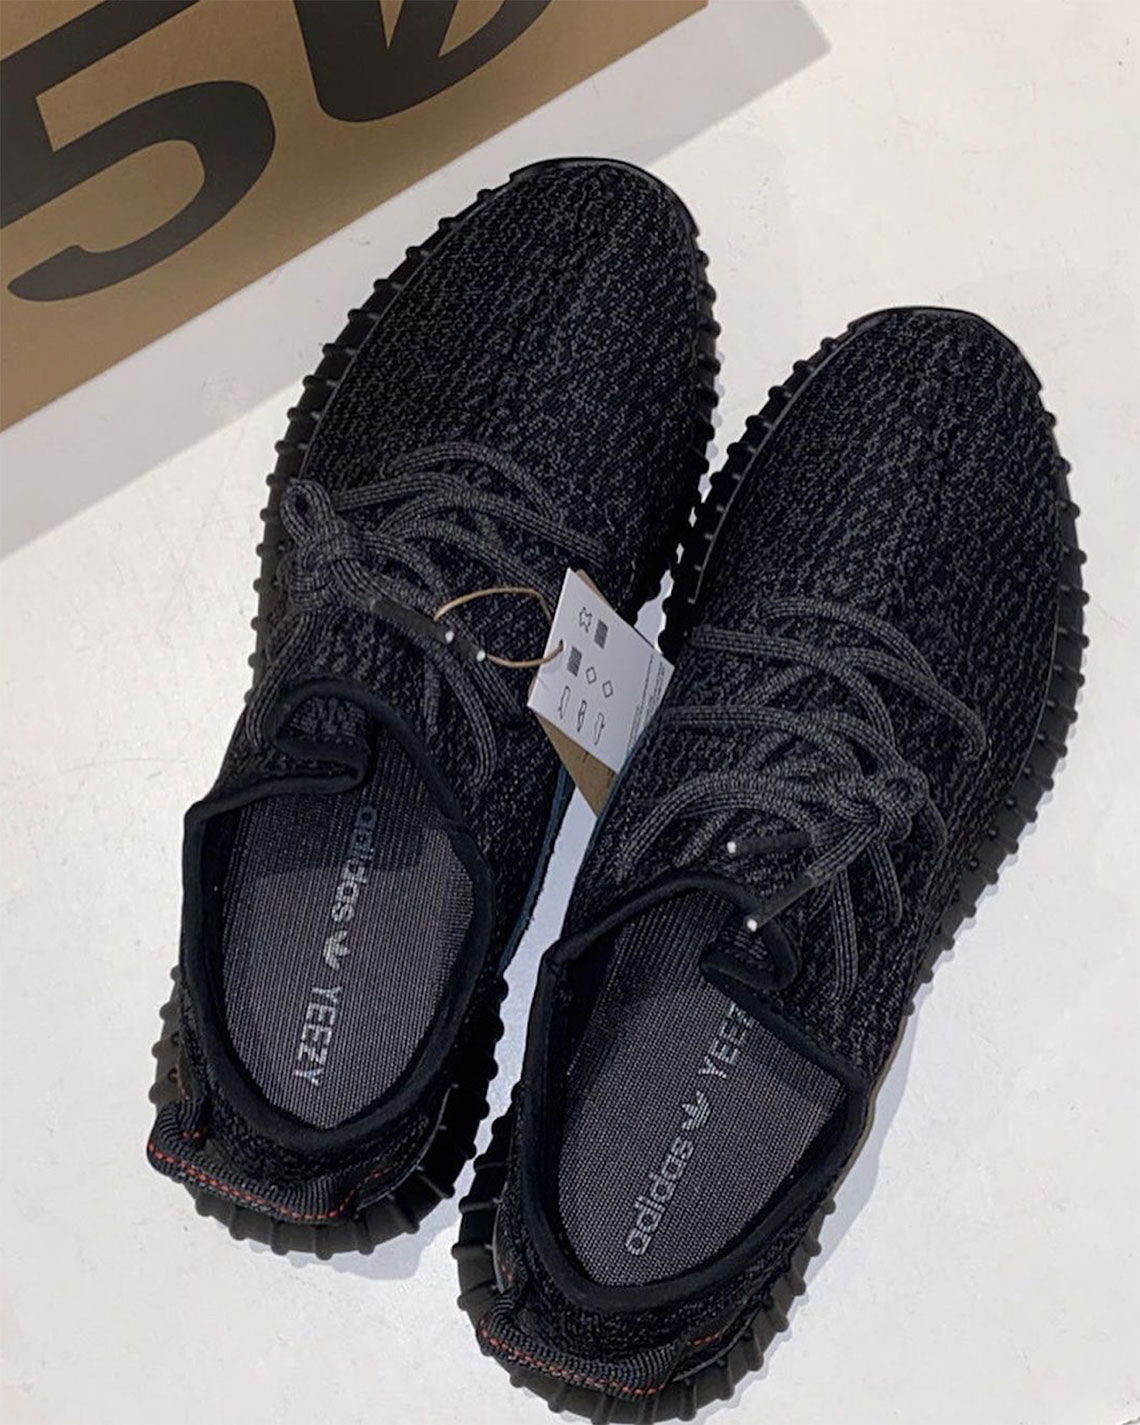 adidas Yeezy Boost 350 "Pirate Black" Release Info |